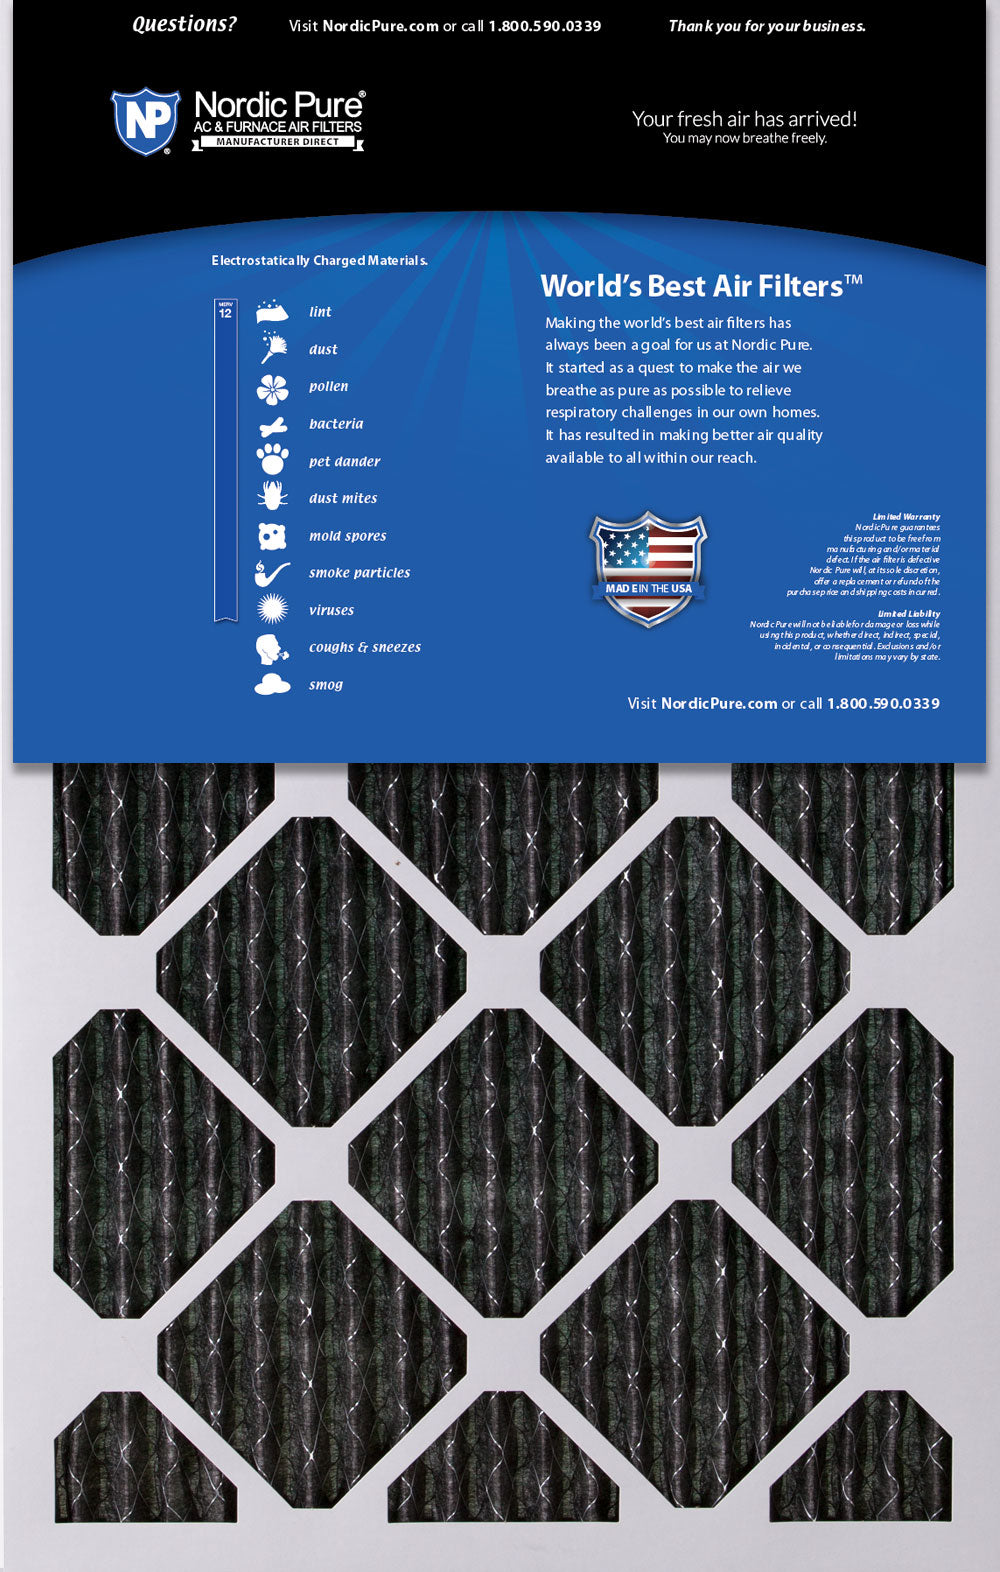 16x24x1 Furnace Air Filters MERV 12 Pleated Plus Carbon